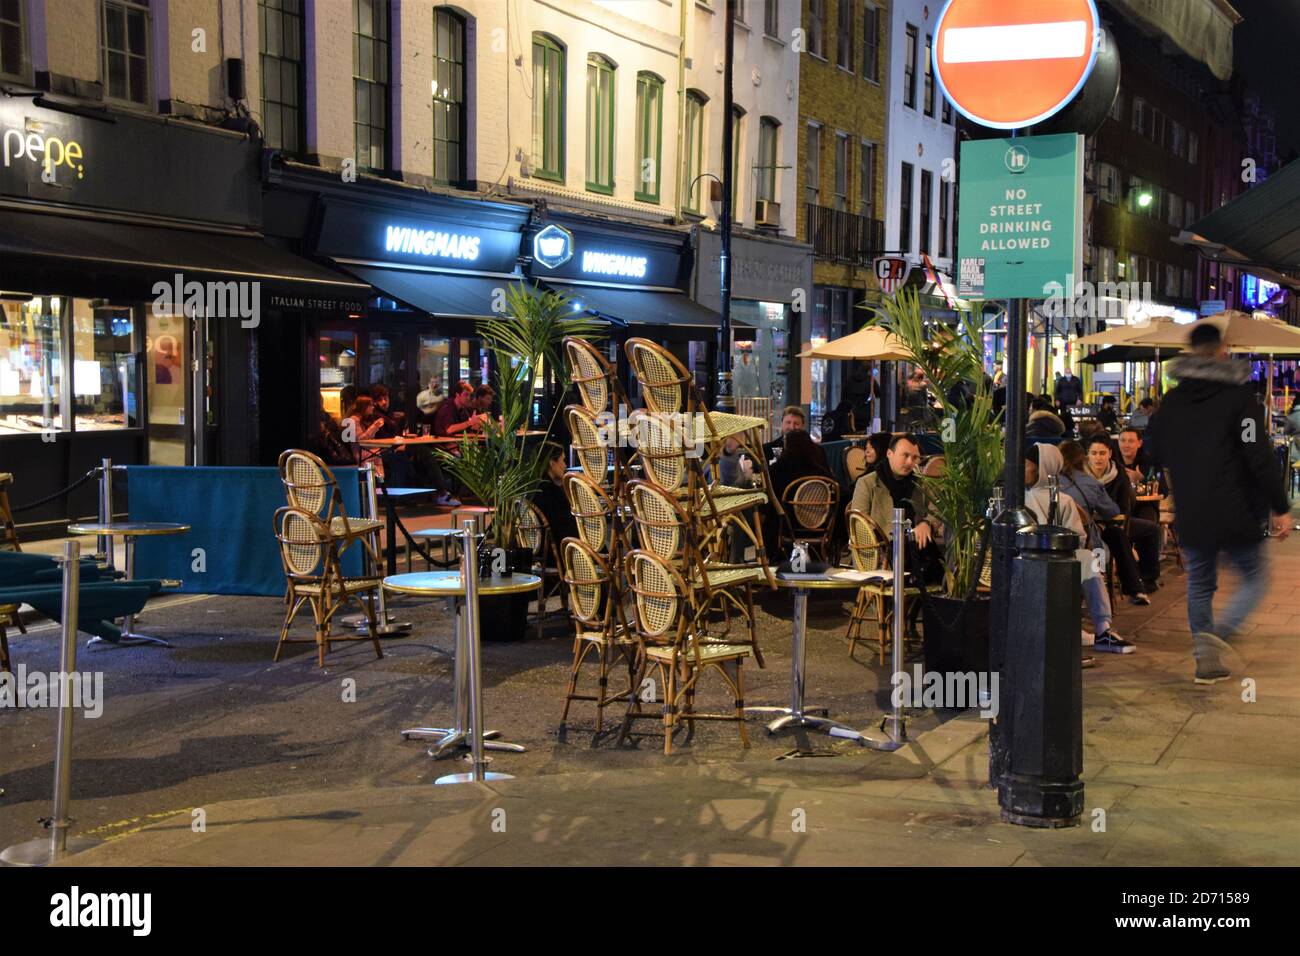 Restaurants and bars closing early on Old Compton Street, Soho. New curfew and social distancing rules mean that bars and restaurants in London must close earlier than in recent months, with many already shut by 9 pm. Stock Photo